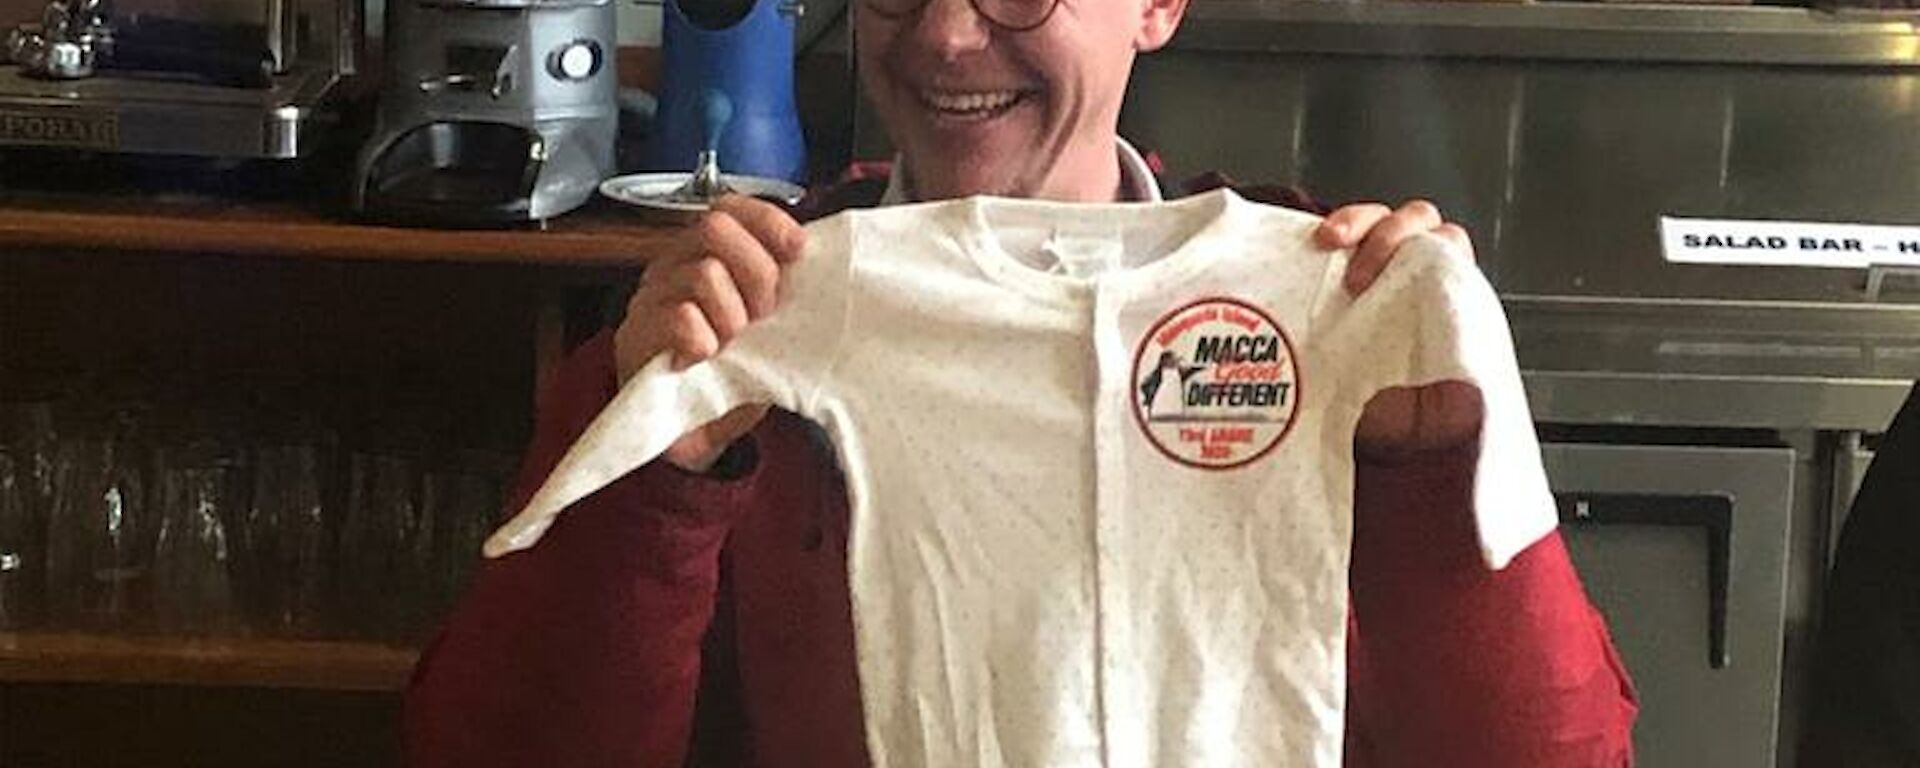 Expeditioner holding a baby onesie at the table.